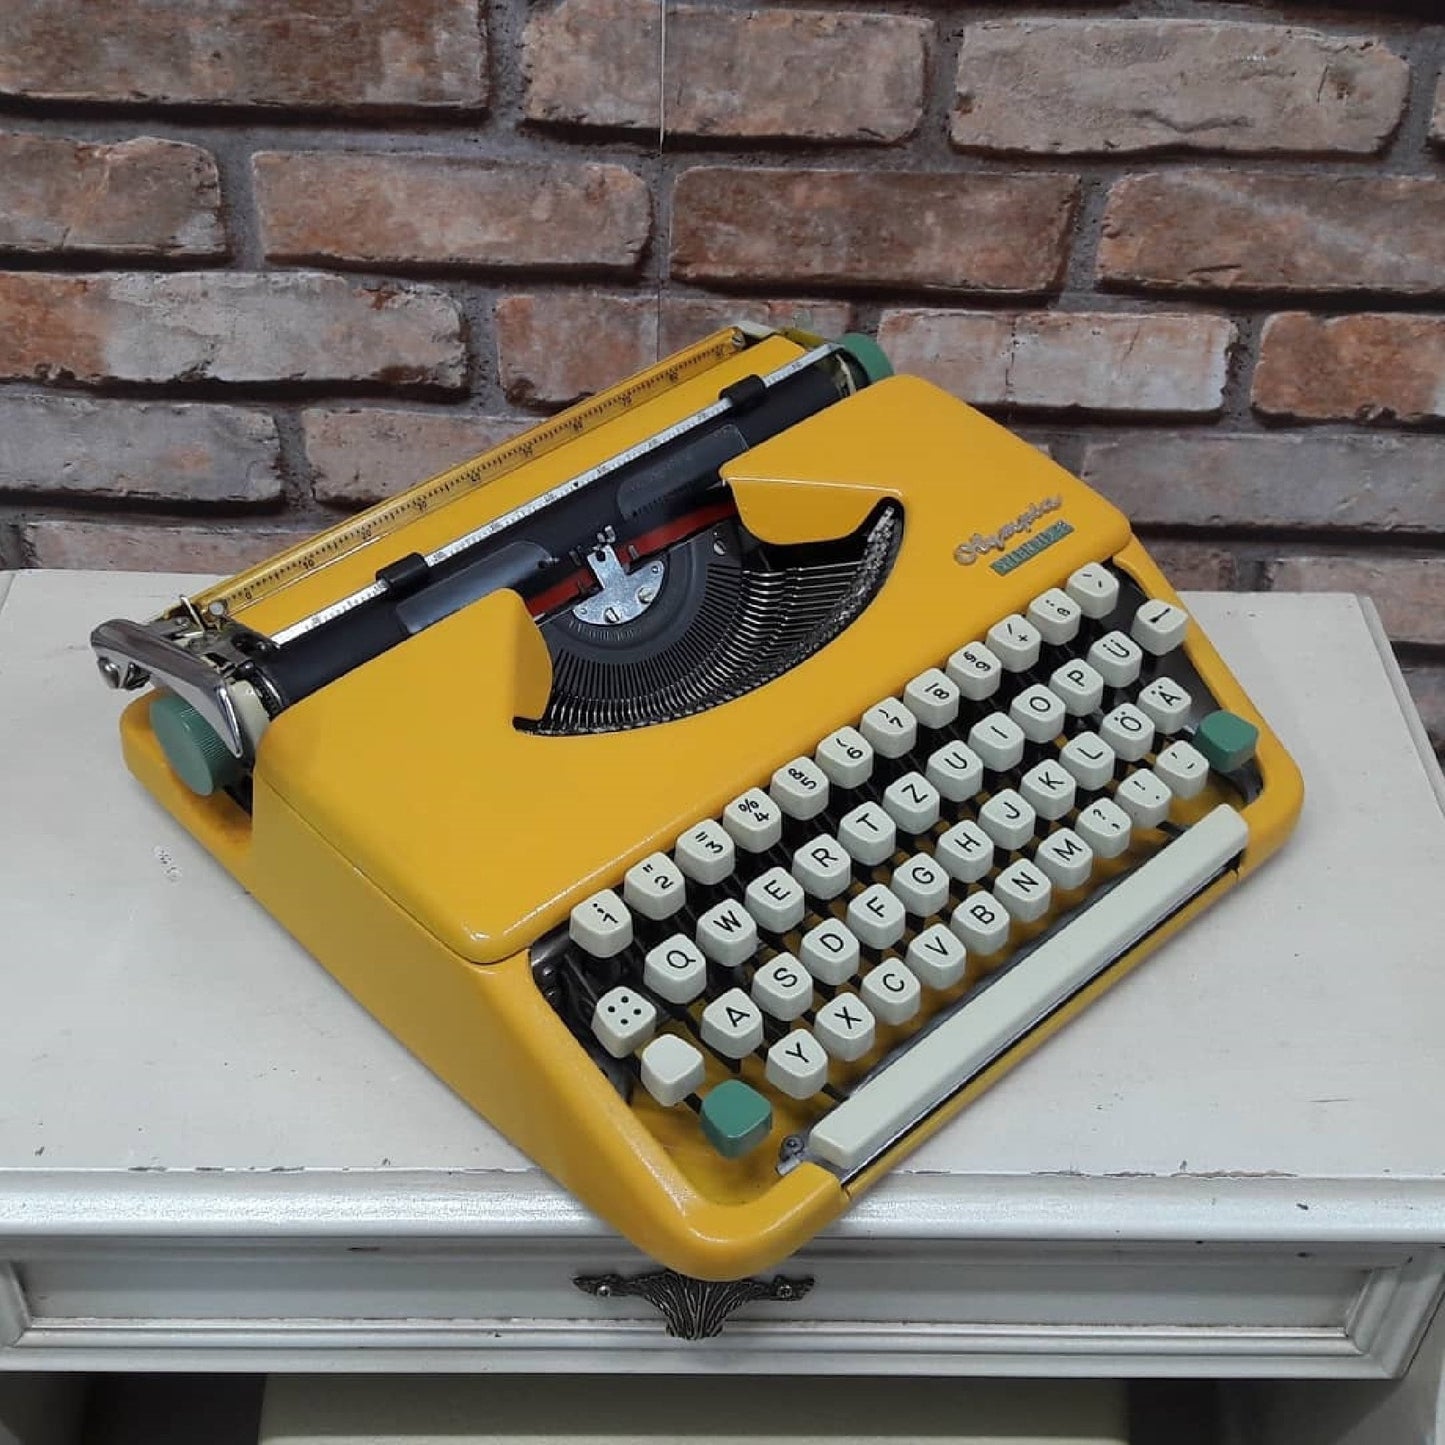 Olympia Splendid 33 Typewriter | Fully Operational | Yellow Elegance for a Splash of Vintage Style | Elevate Your Writing Experience!